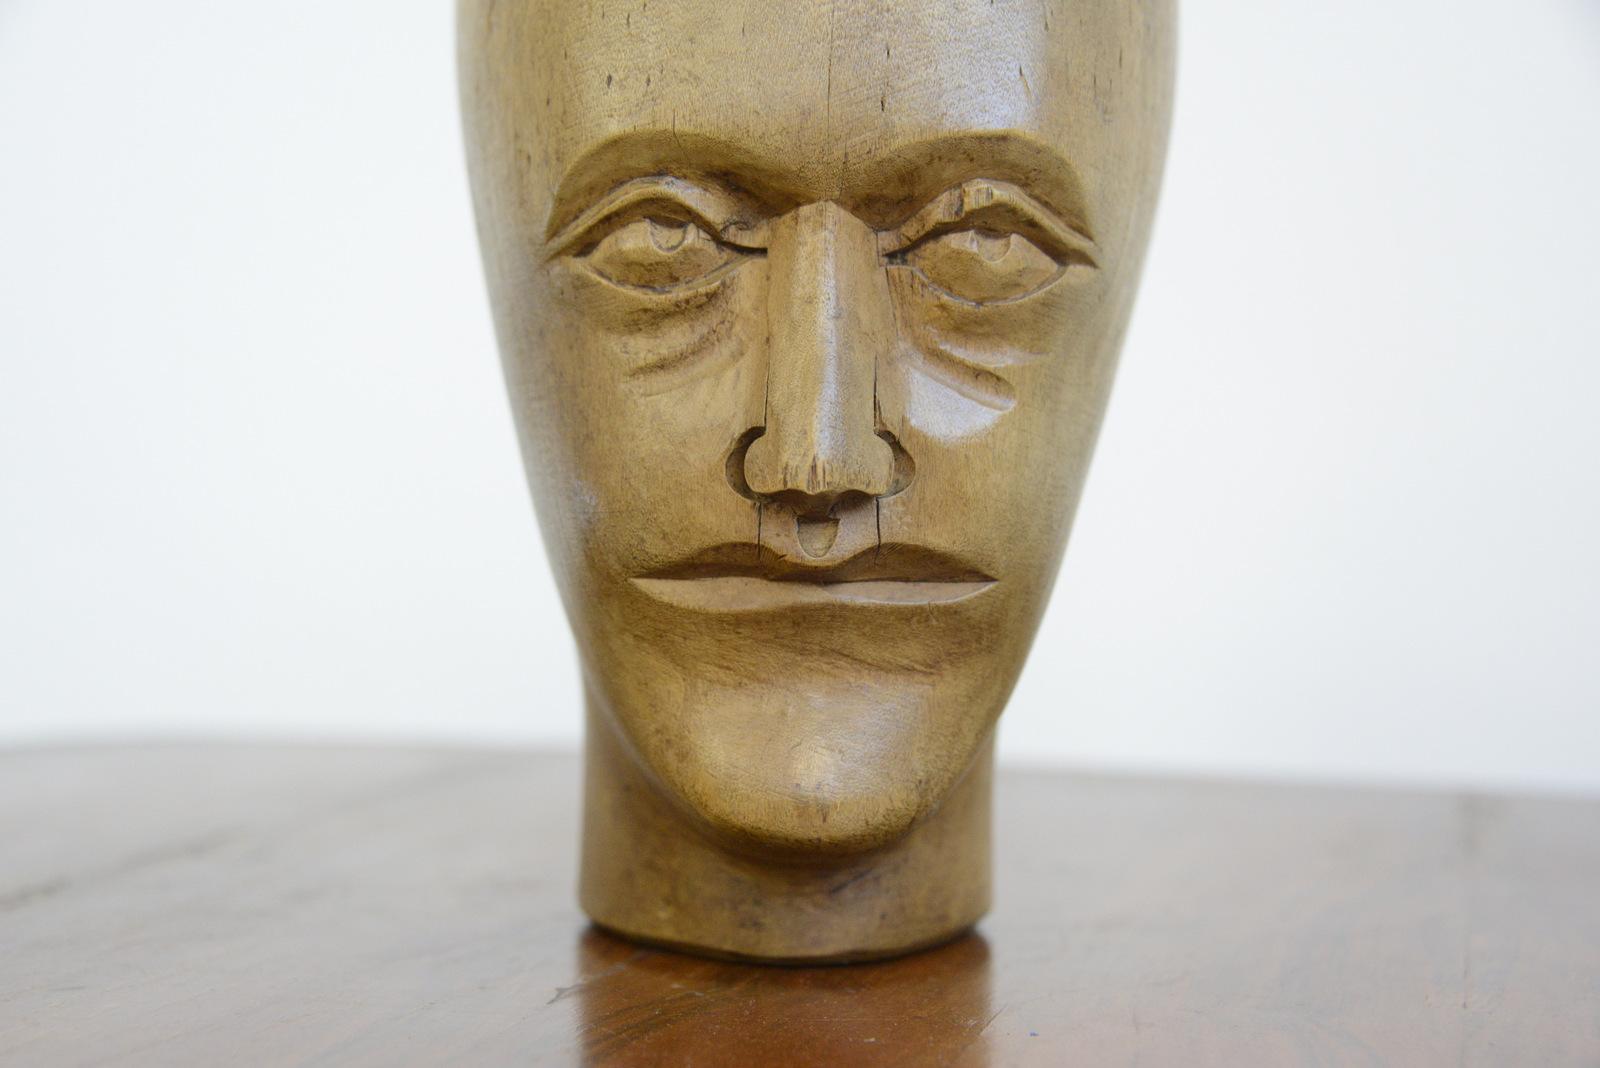 German carved wooden milliners head circa 1910

- Hand carved from sycamore
- Used in the displaying and making of hats
- German ~ 1910
- Measures: 25cm tall x 15cm wide x 18cm deep

Condition report

Signs of its previous in the form of